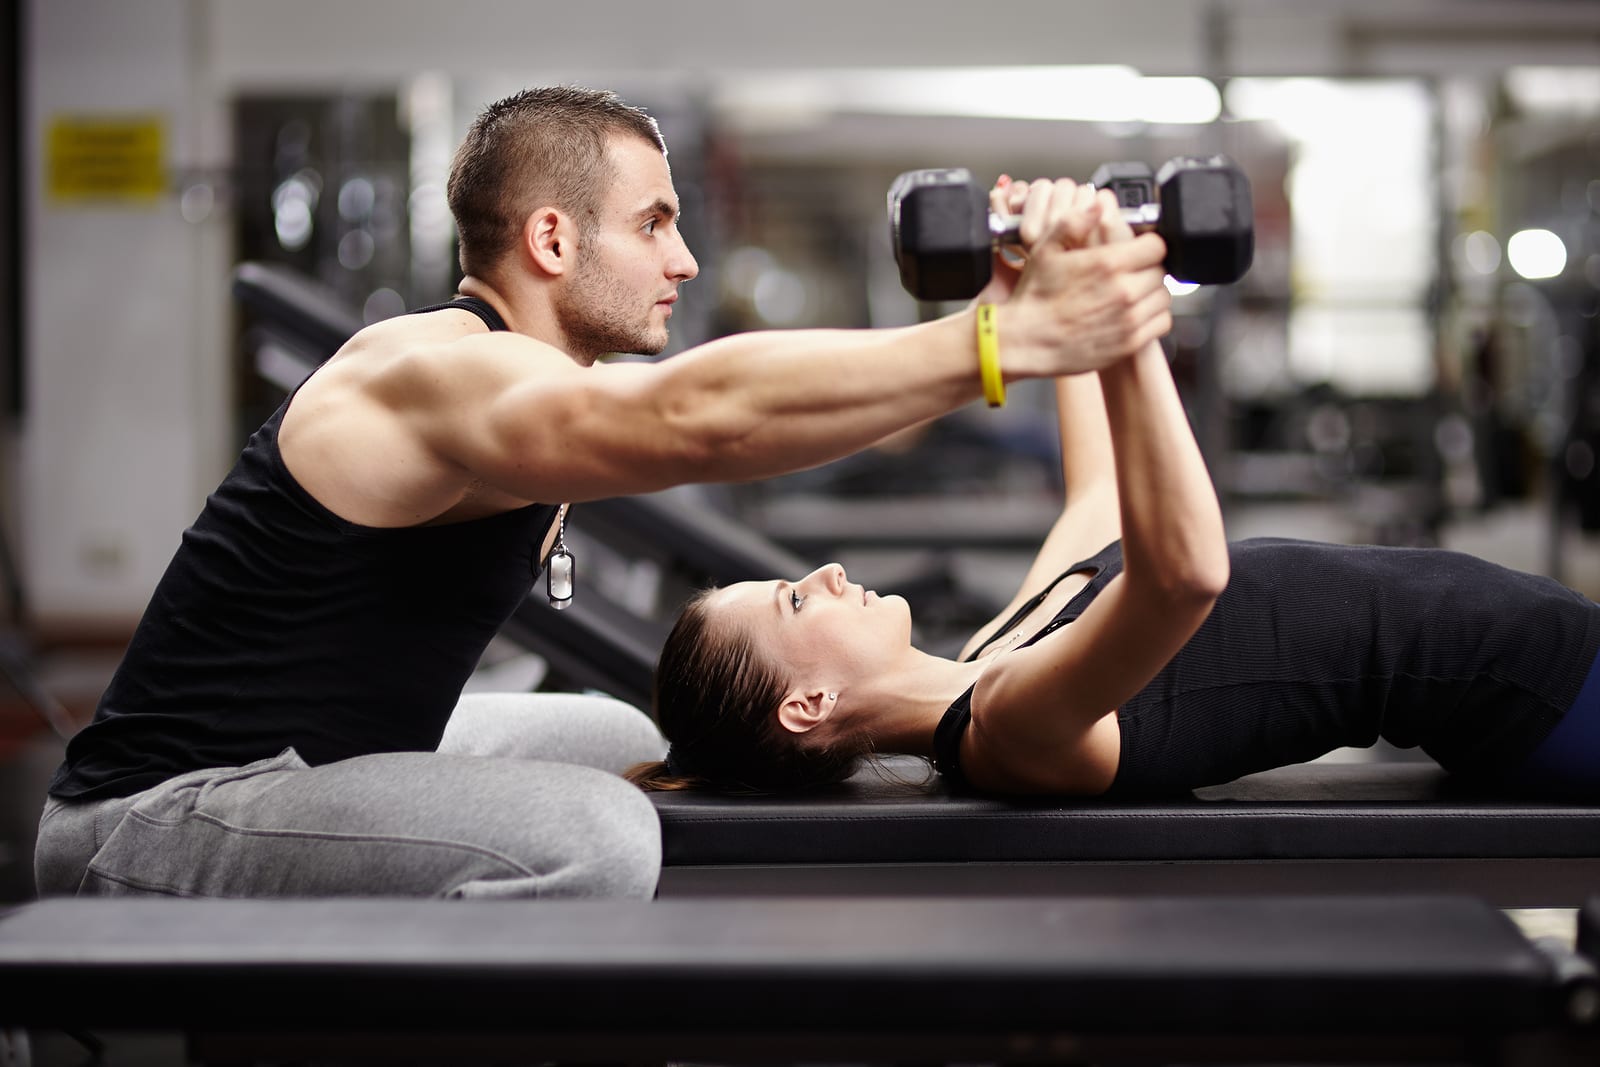 How to earn a £100k a year as a personal trainer